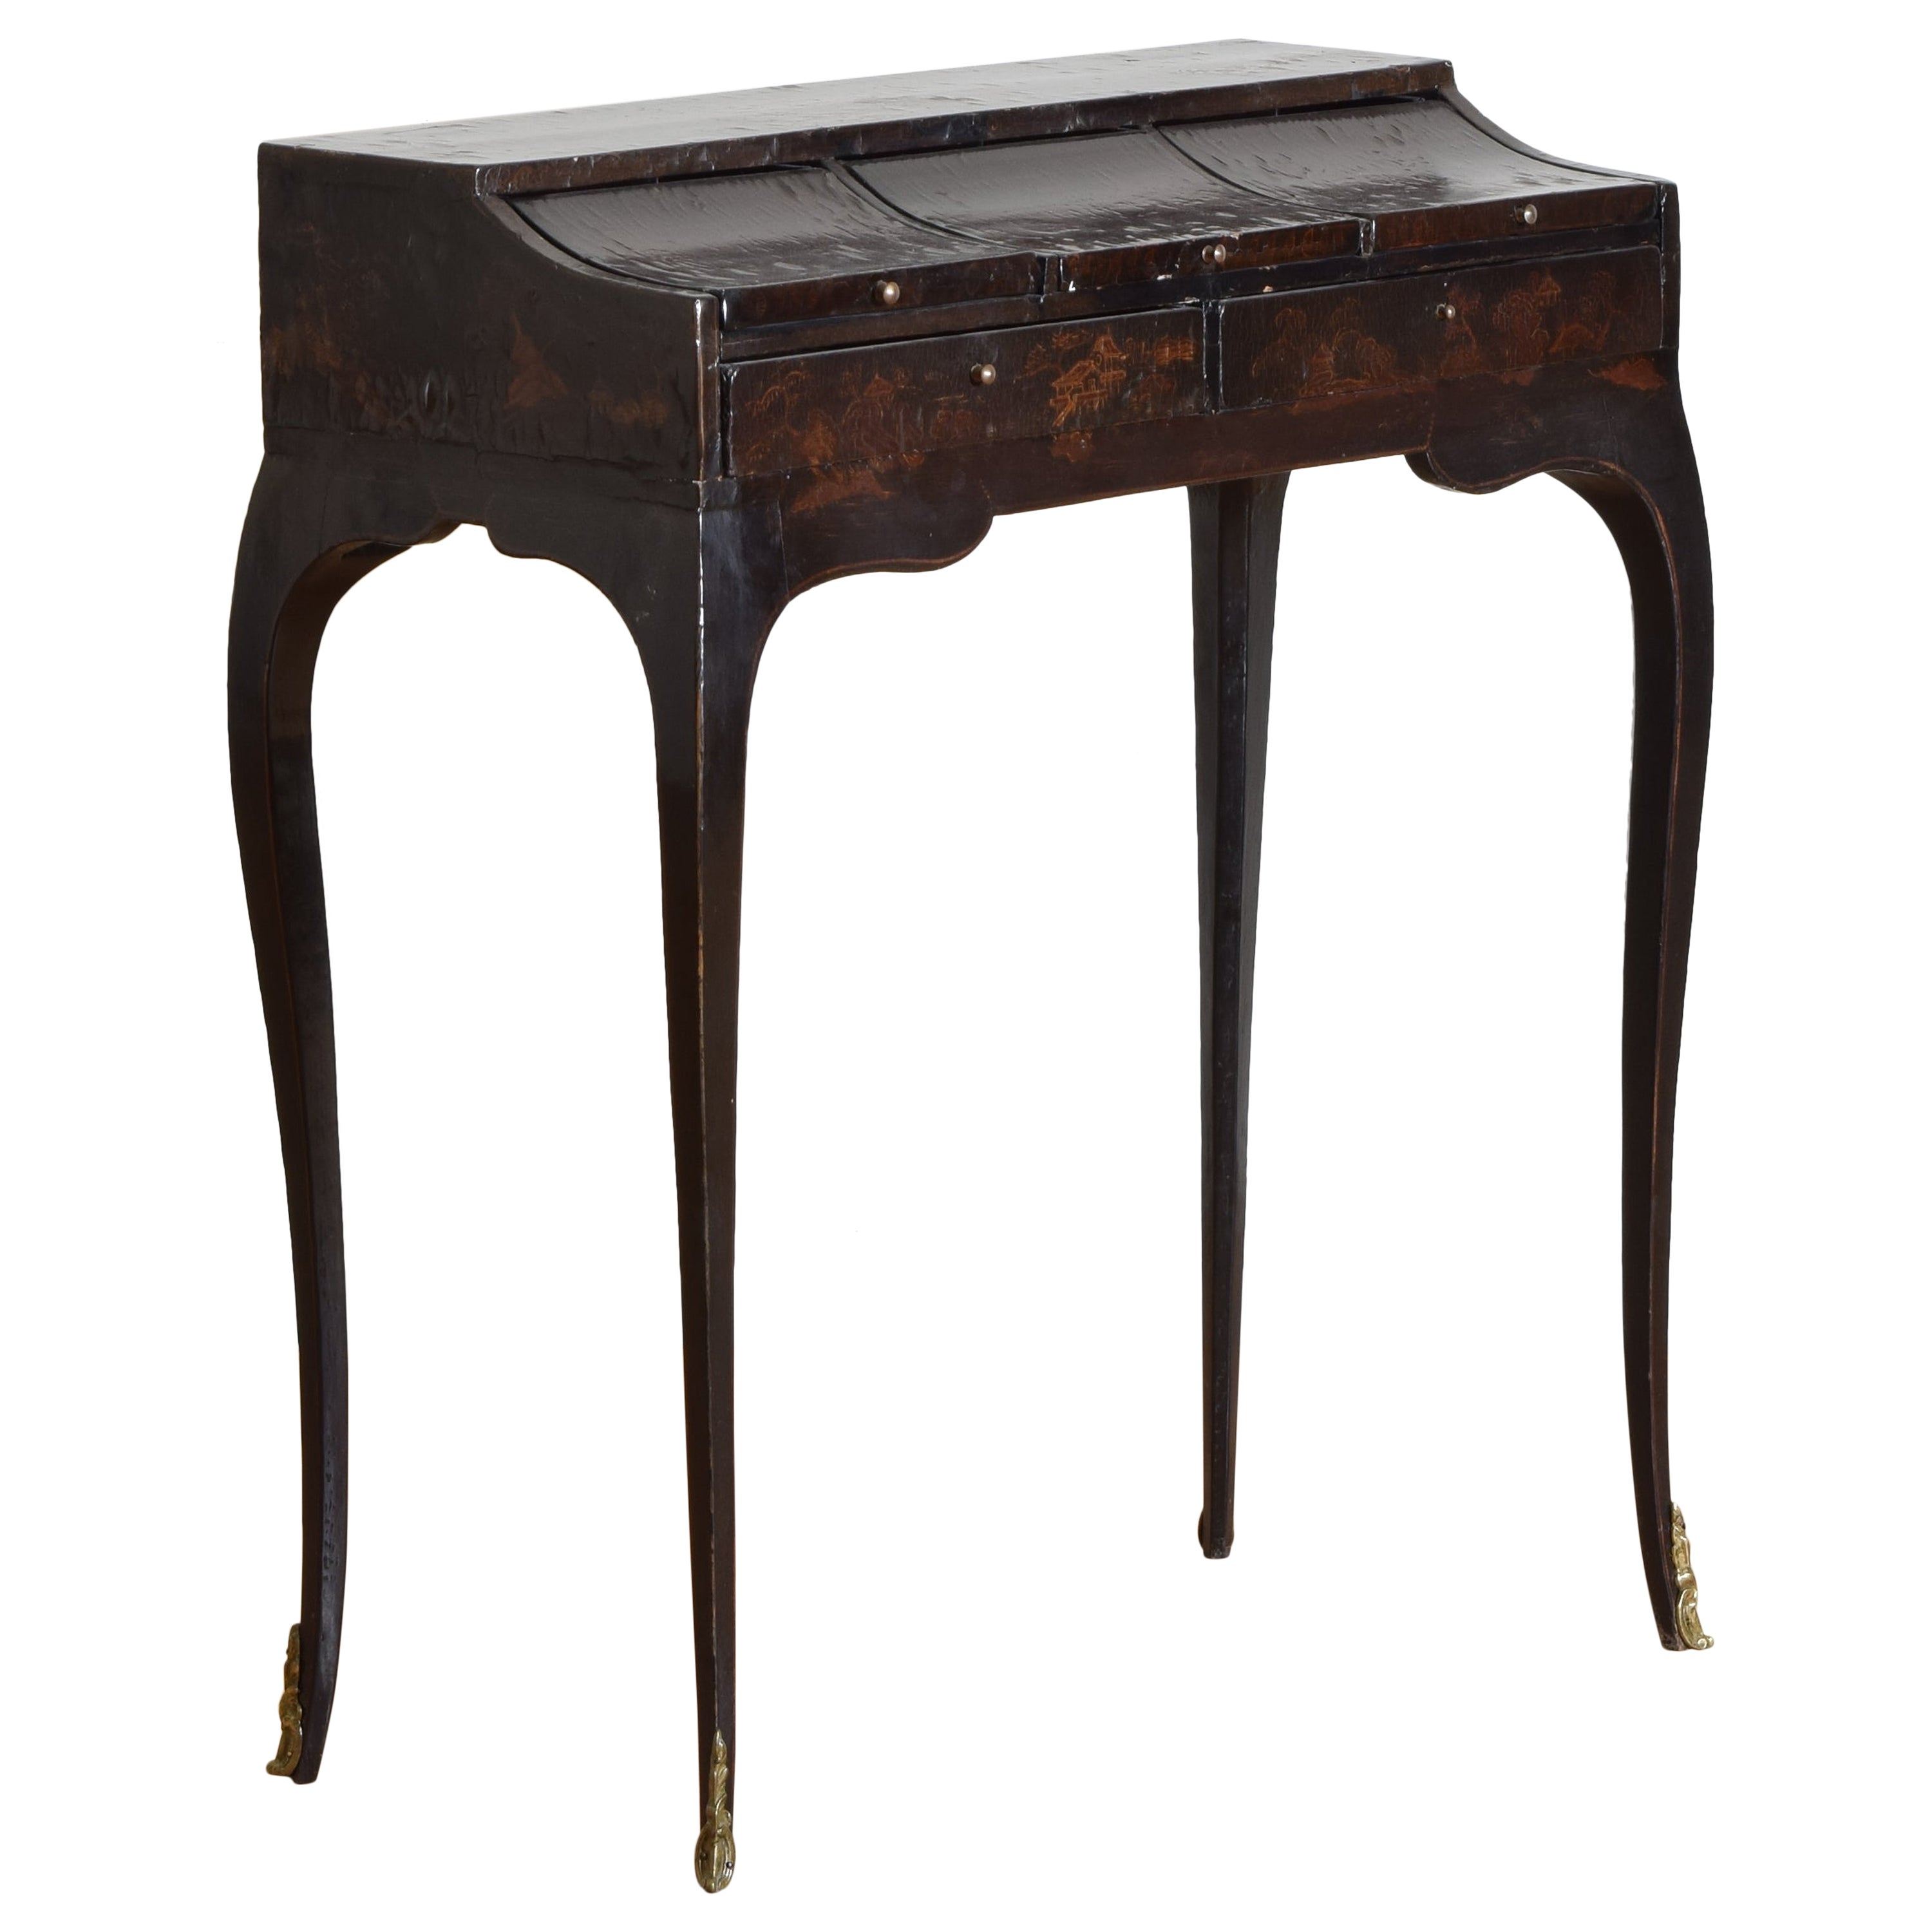 Lacquered and Veneered Bureau de Dame, 18th to 19th C.